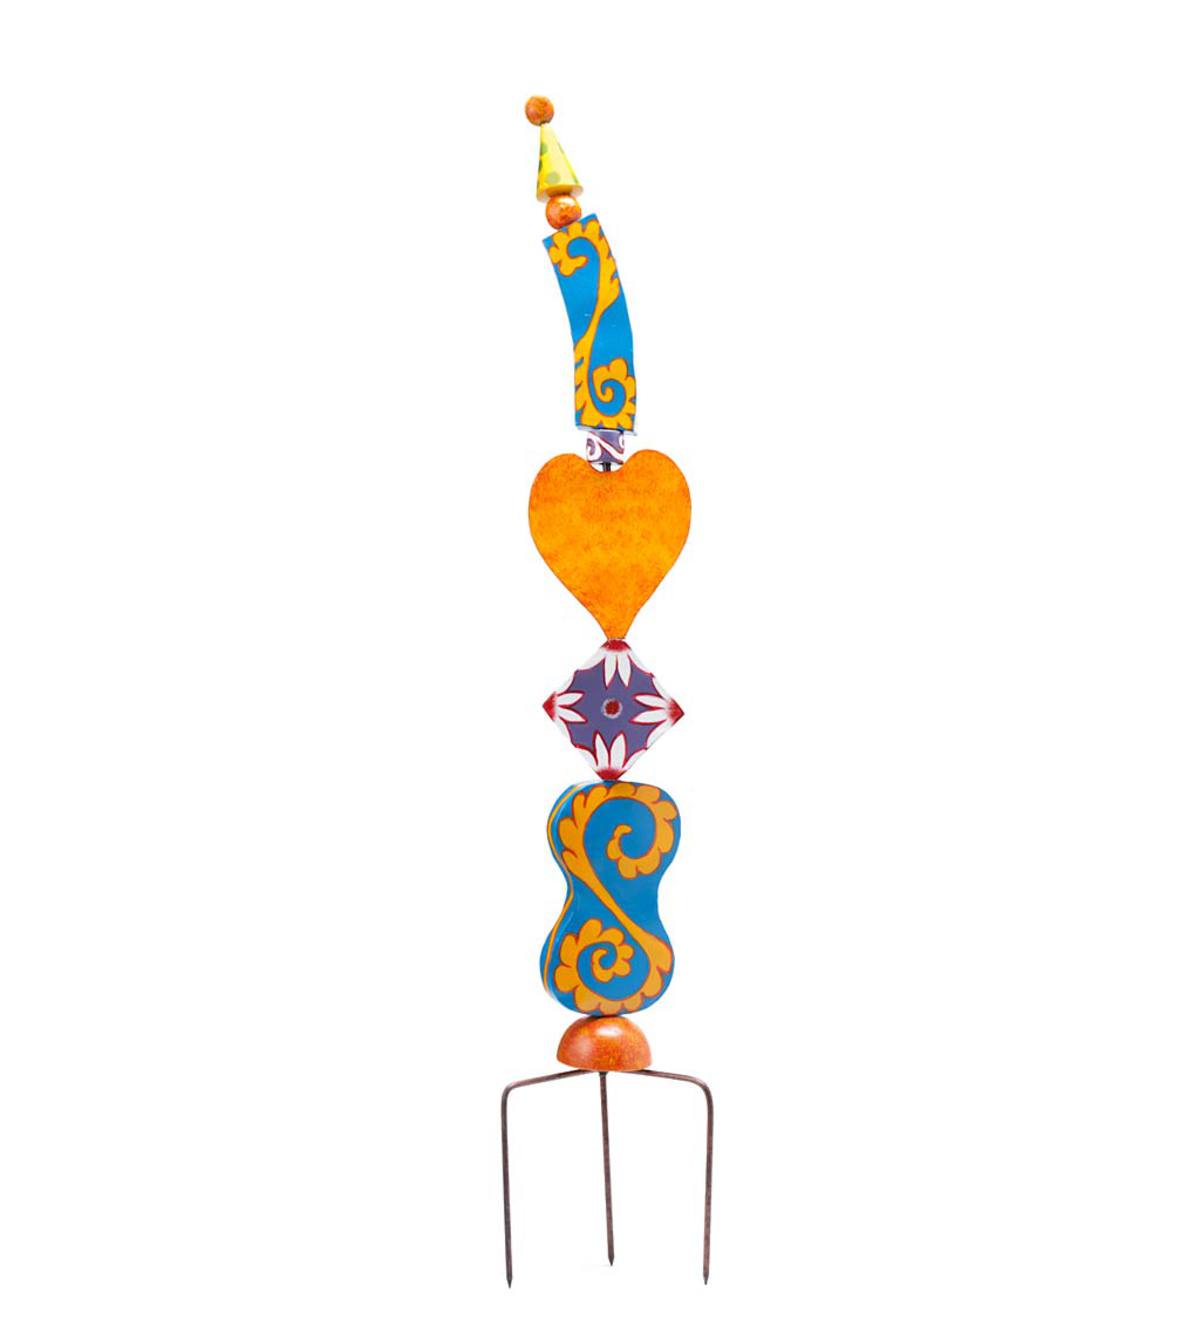 Colorful Metal Decorative Garden Stakes - Heart